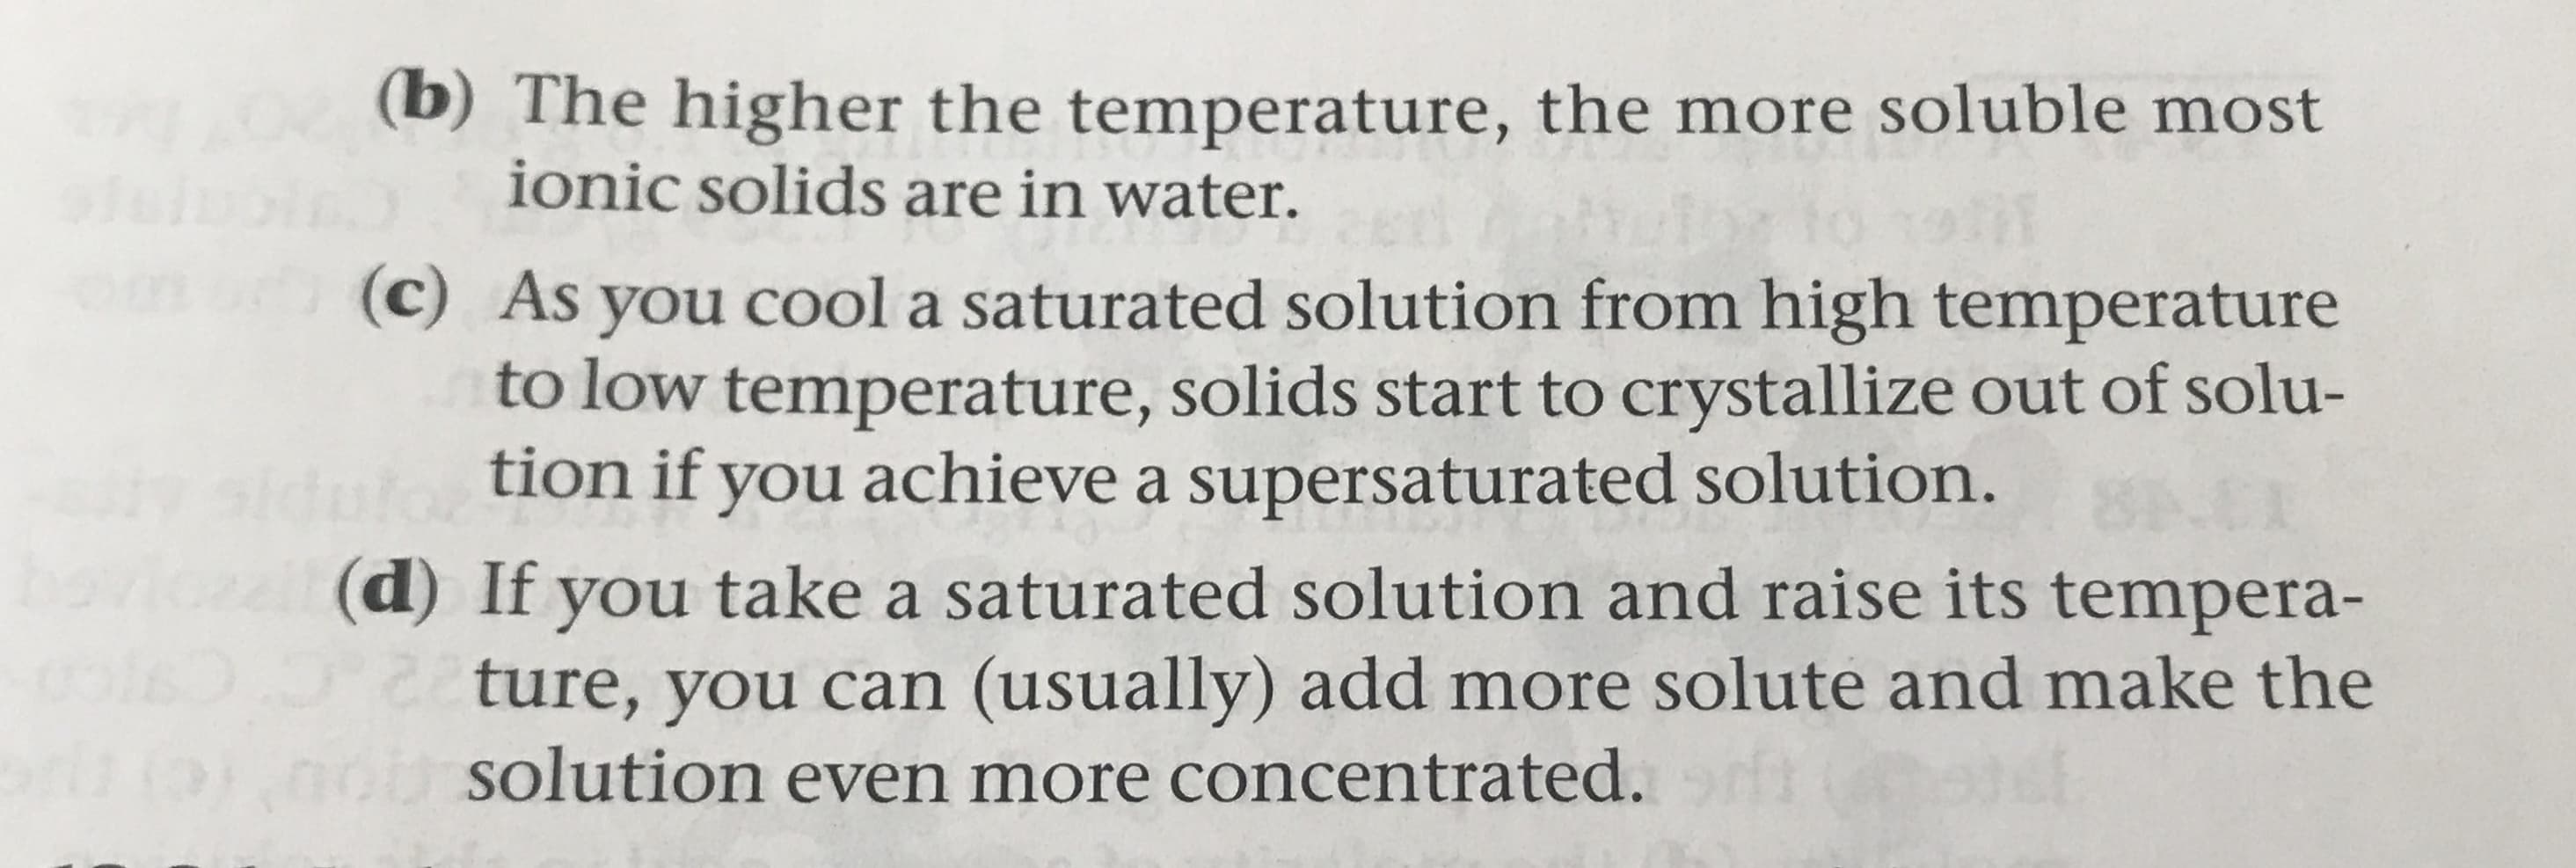 (b) The higher the temperature, the more soluble most
ionic solids are in water
Om
(c) As you cool a saturated solution from high temperature
to low temperature, solids start to crystallize out of solu-
tion if you achieve a supersaturated solution.
0)
(d) If you take a saturated solution and raise its tempera-
ture, you can (usually) add more solute and make the
solution even more concentrated.
